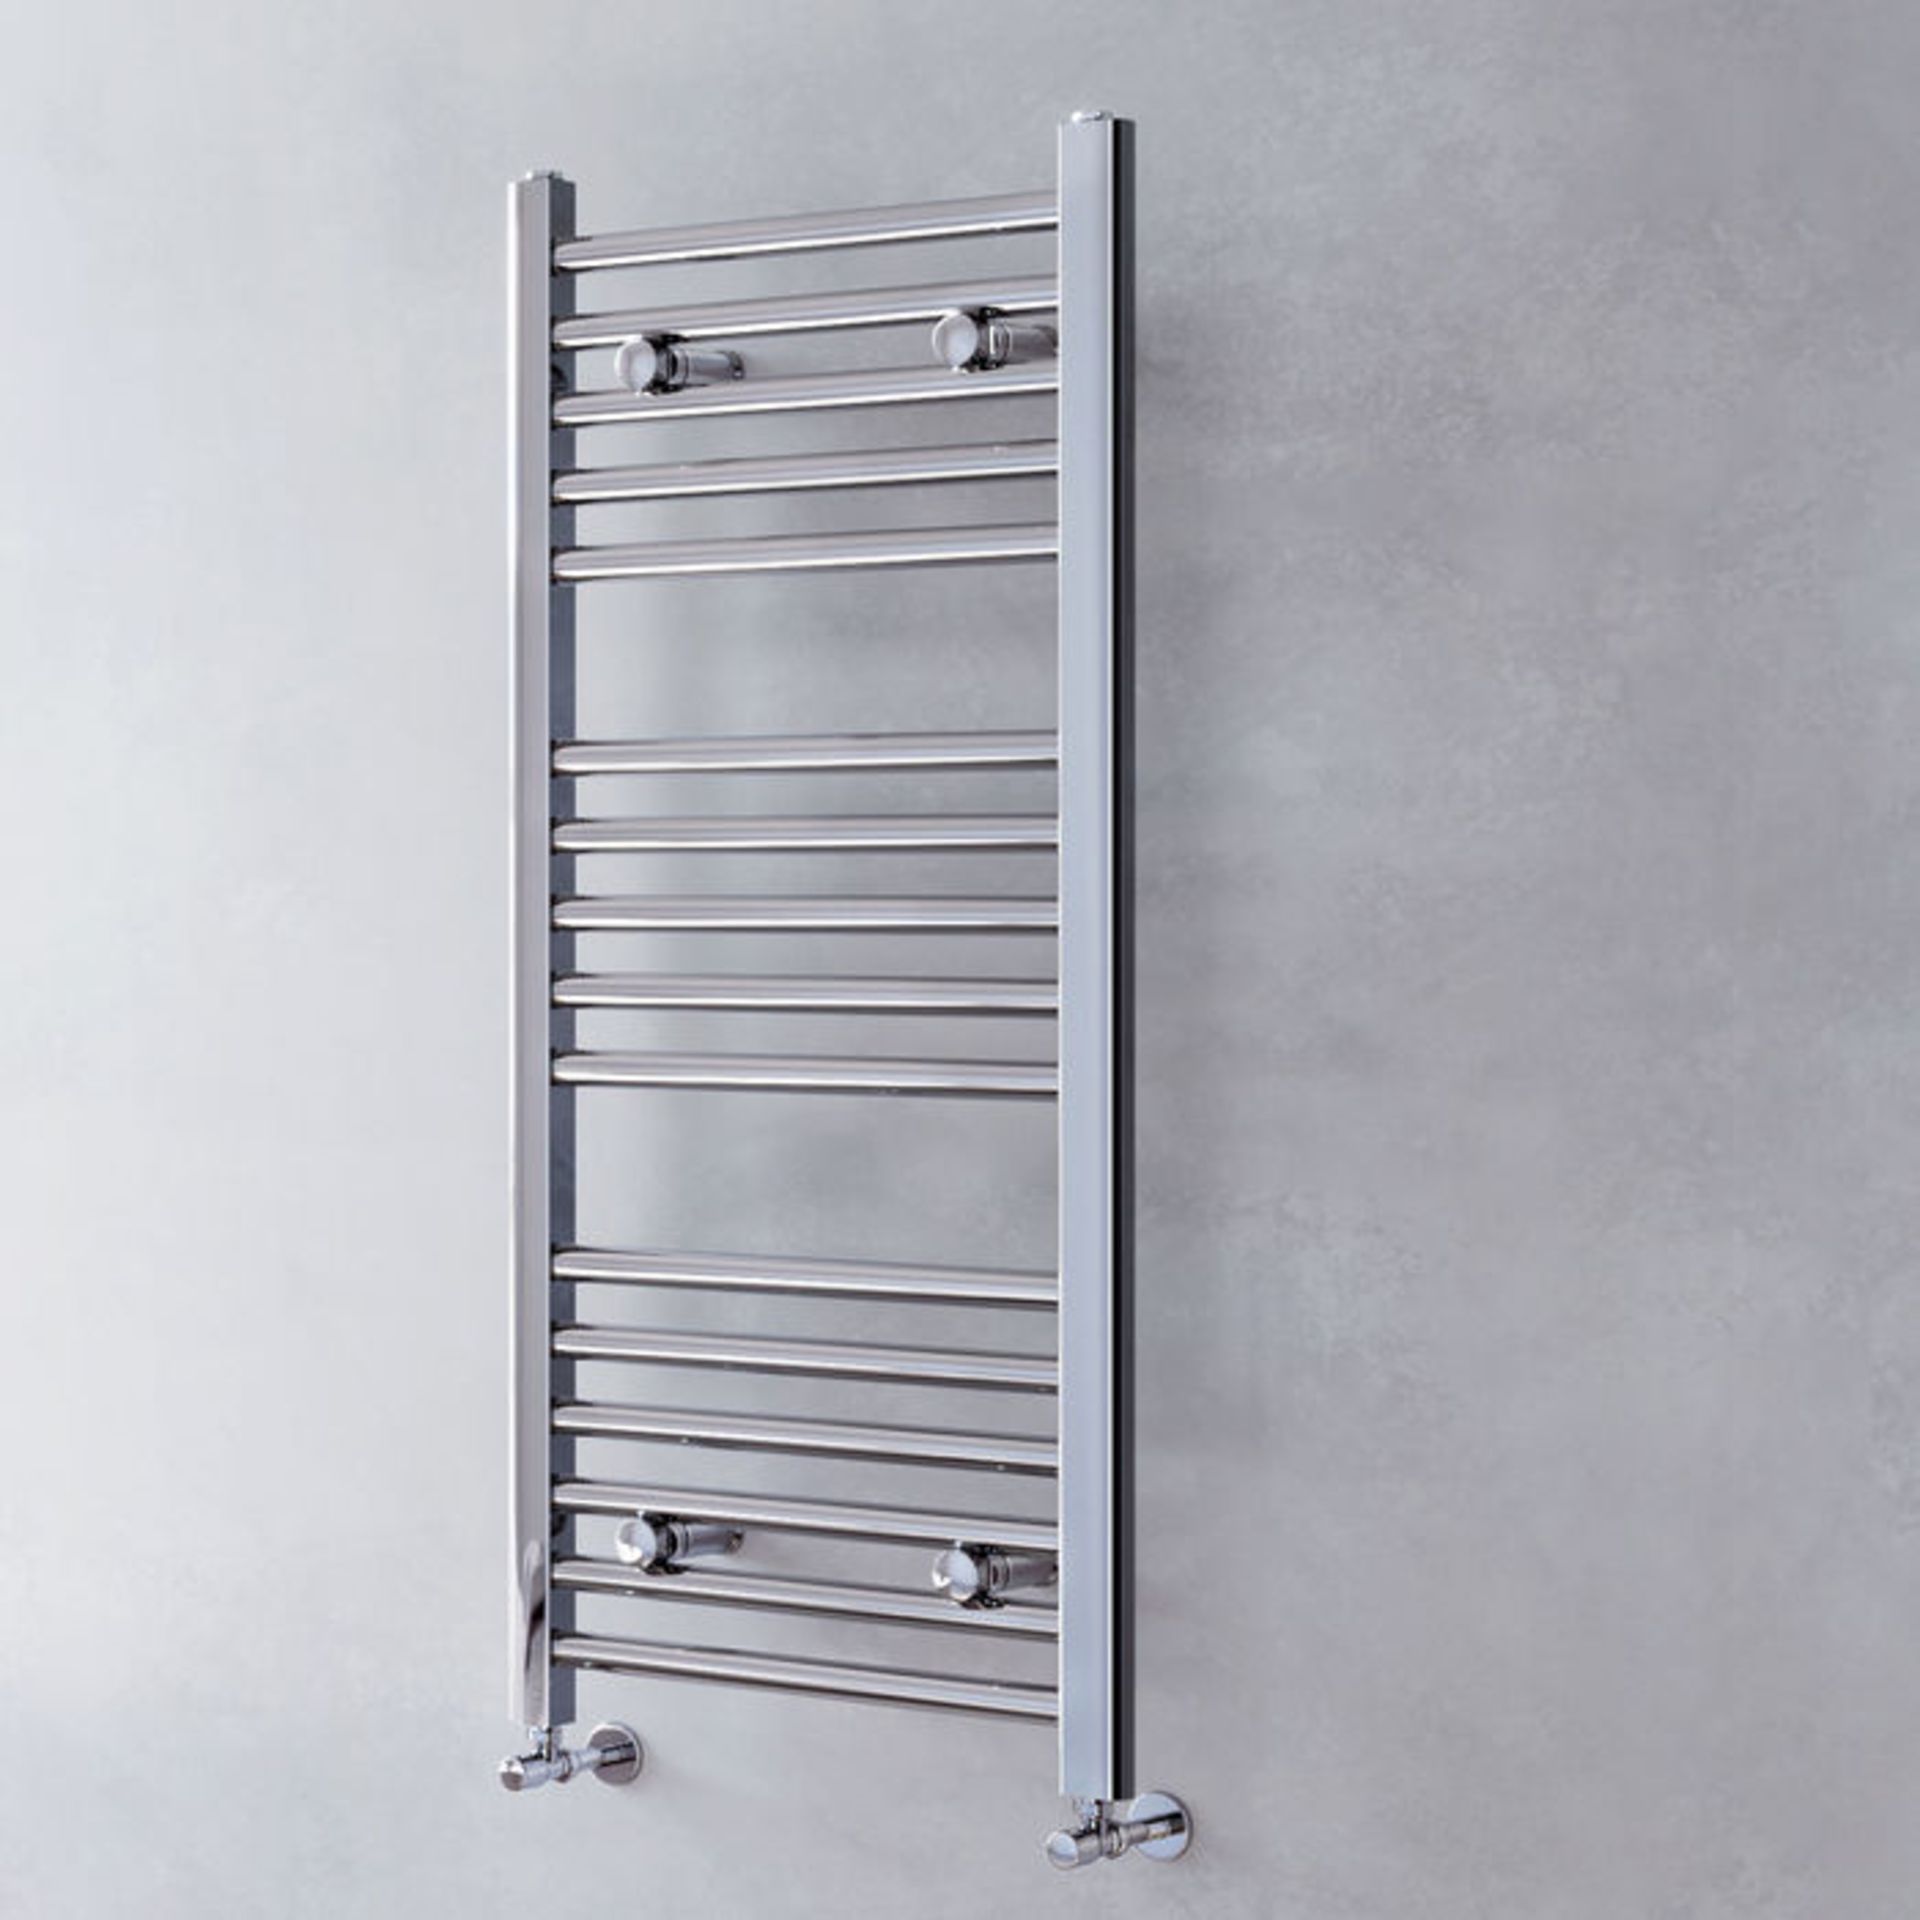 Brand New (HM133) 1000x450mm - 25mm Tubes - Chrome Heated Straight Rail Ladder Towel Radiator. This - Image 2 of 4